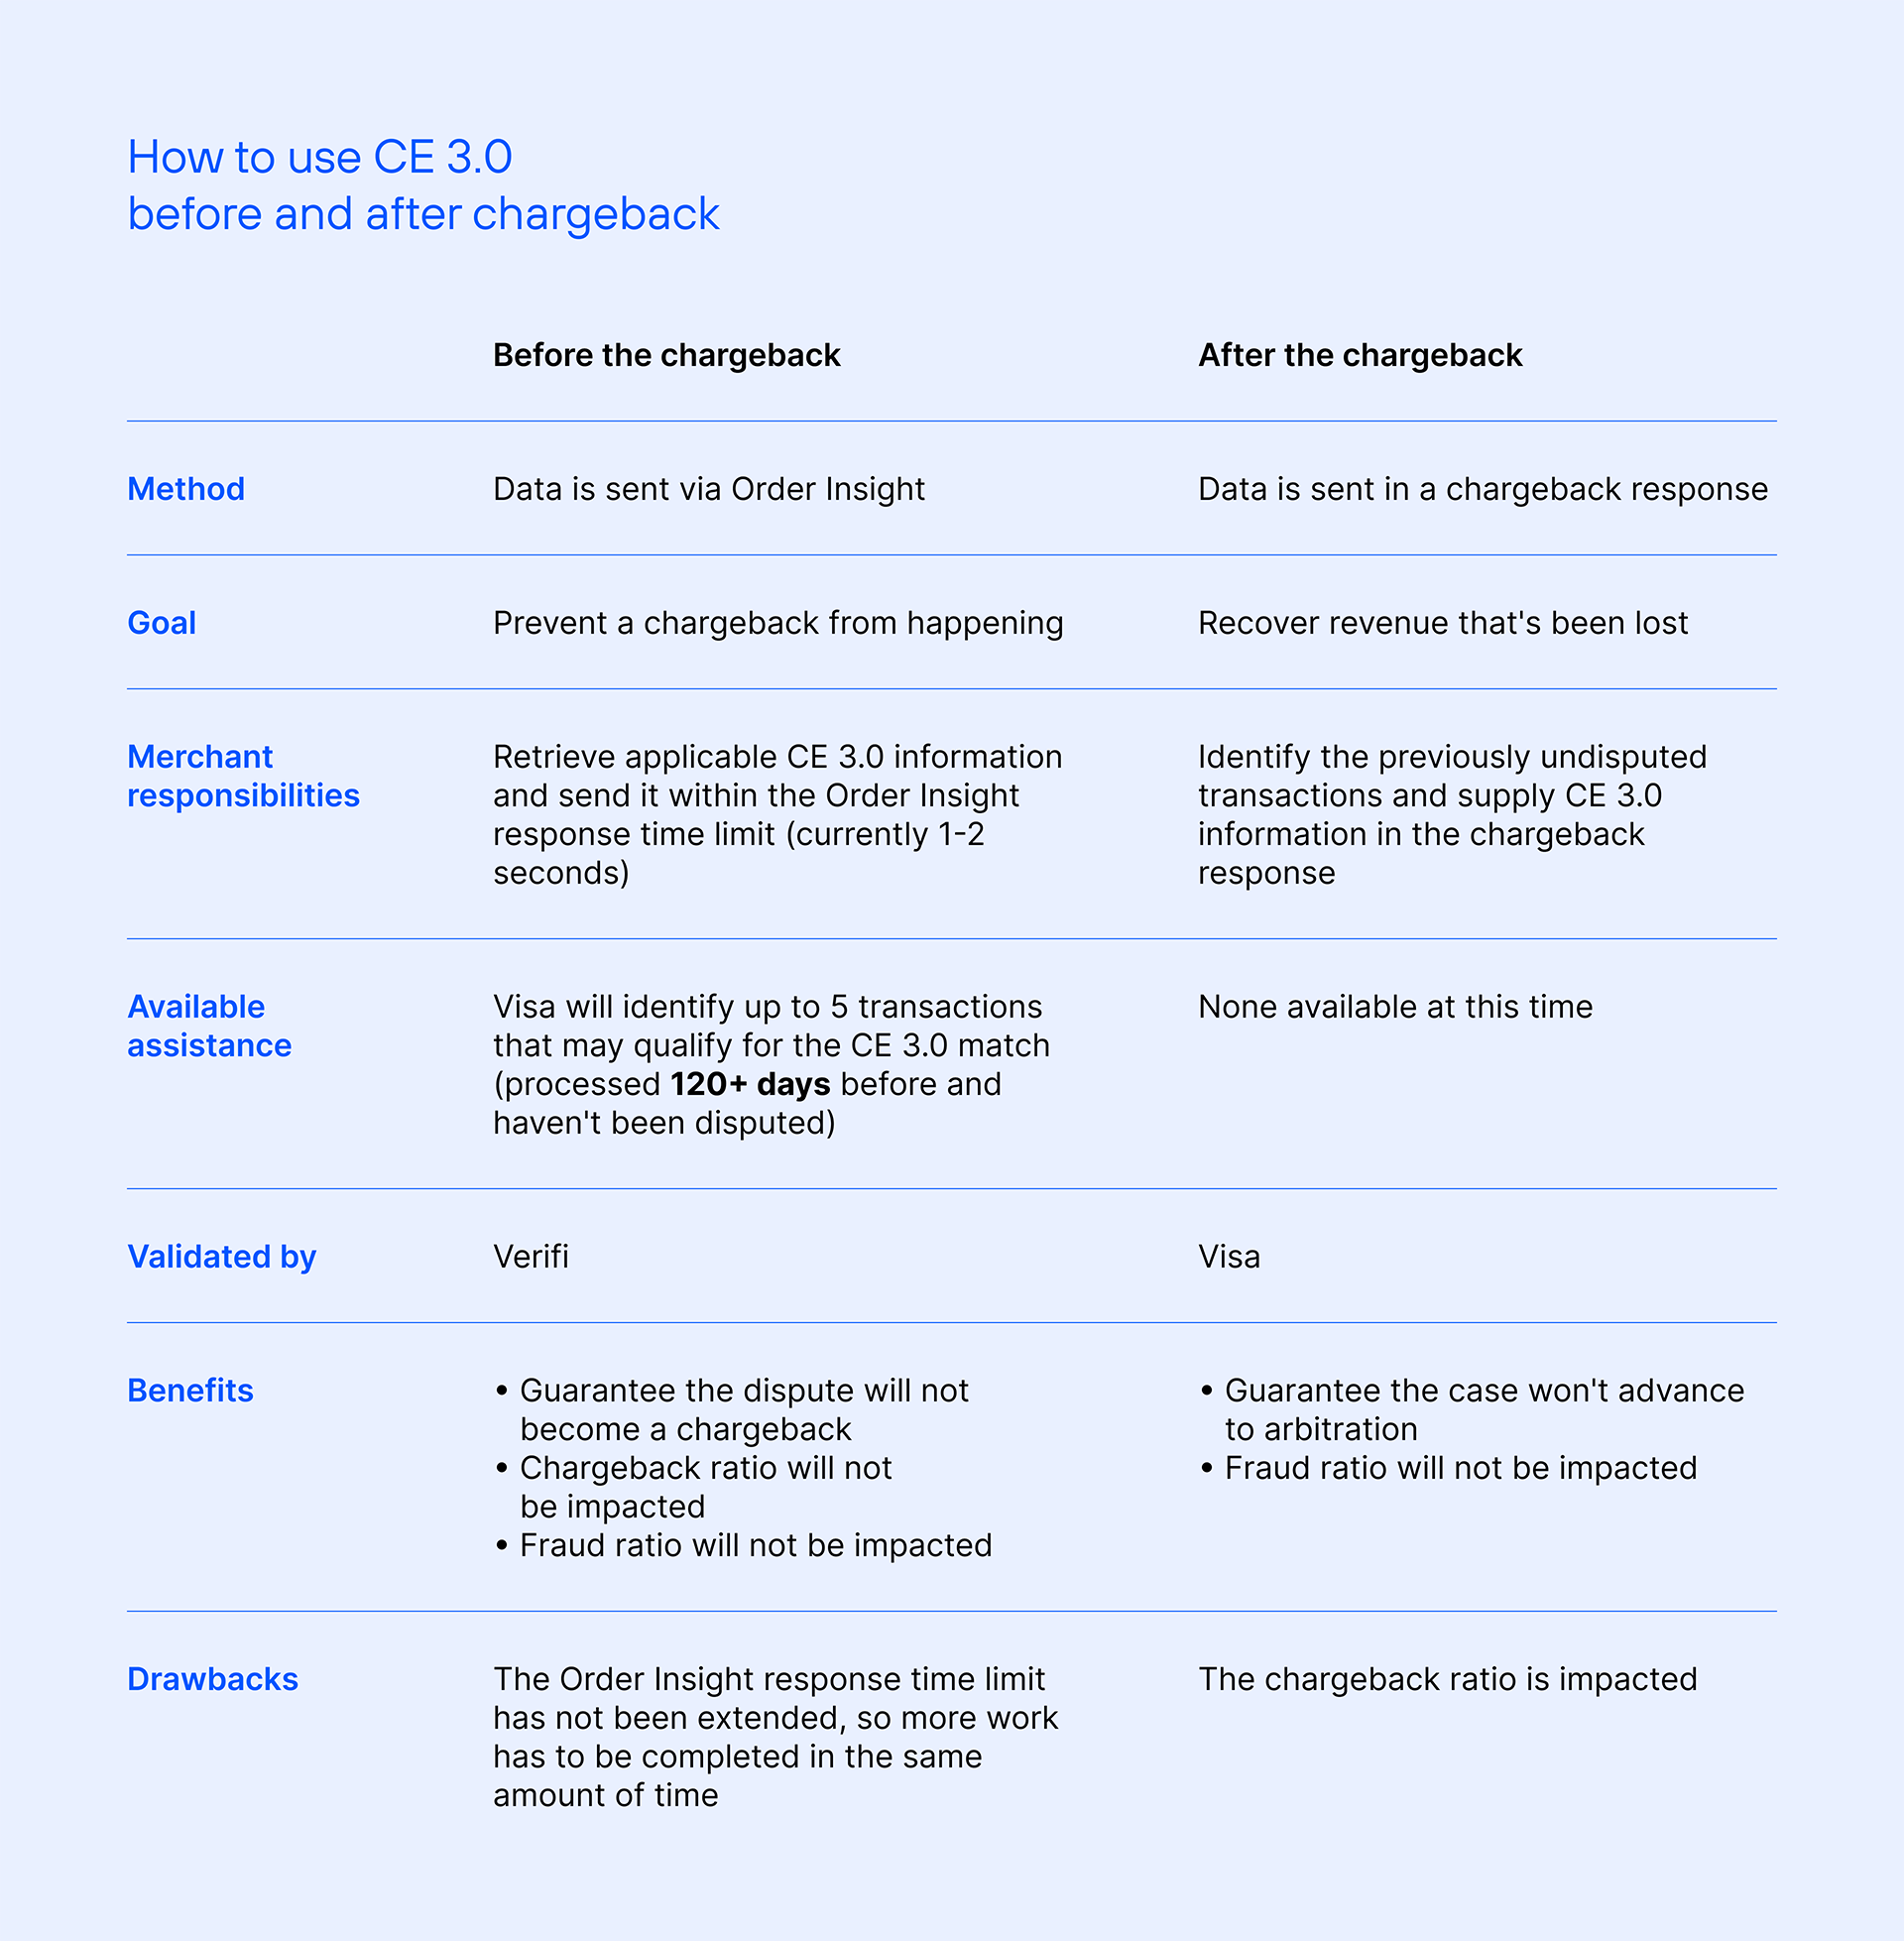 ce3.0 before and after chargeback